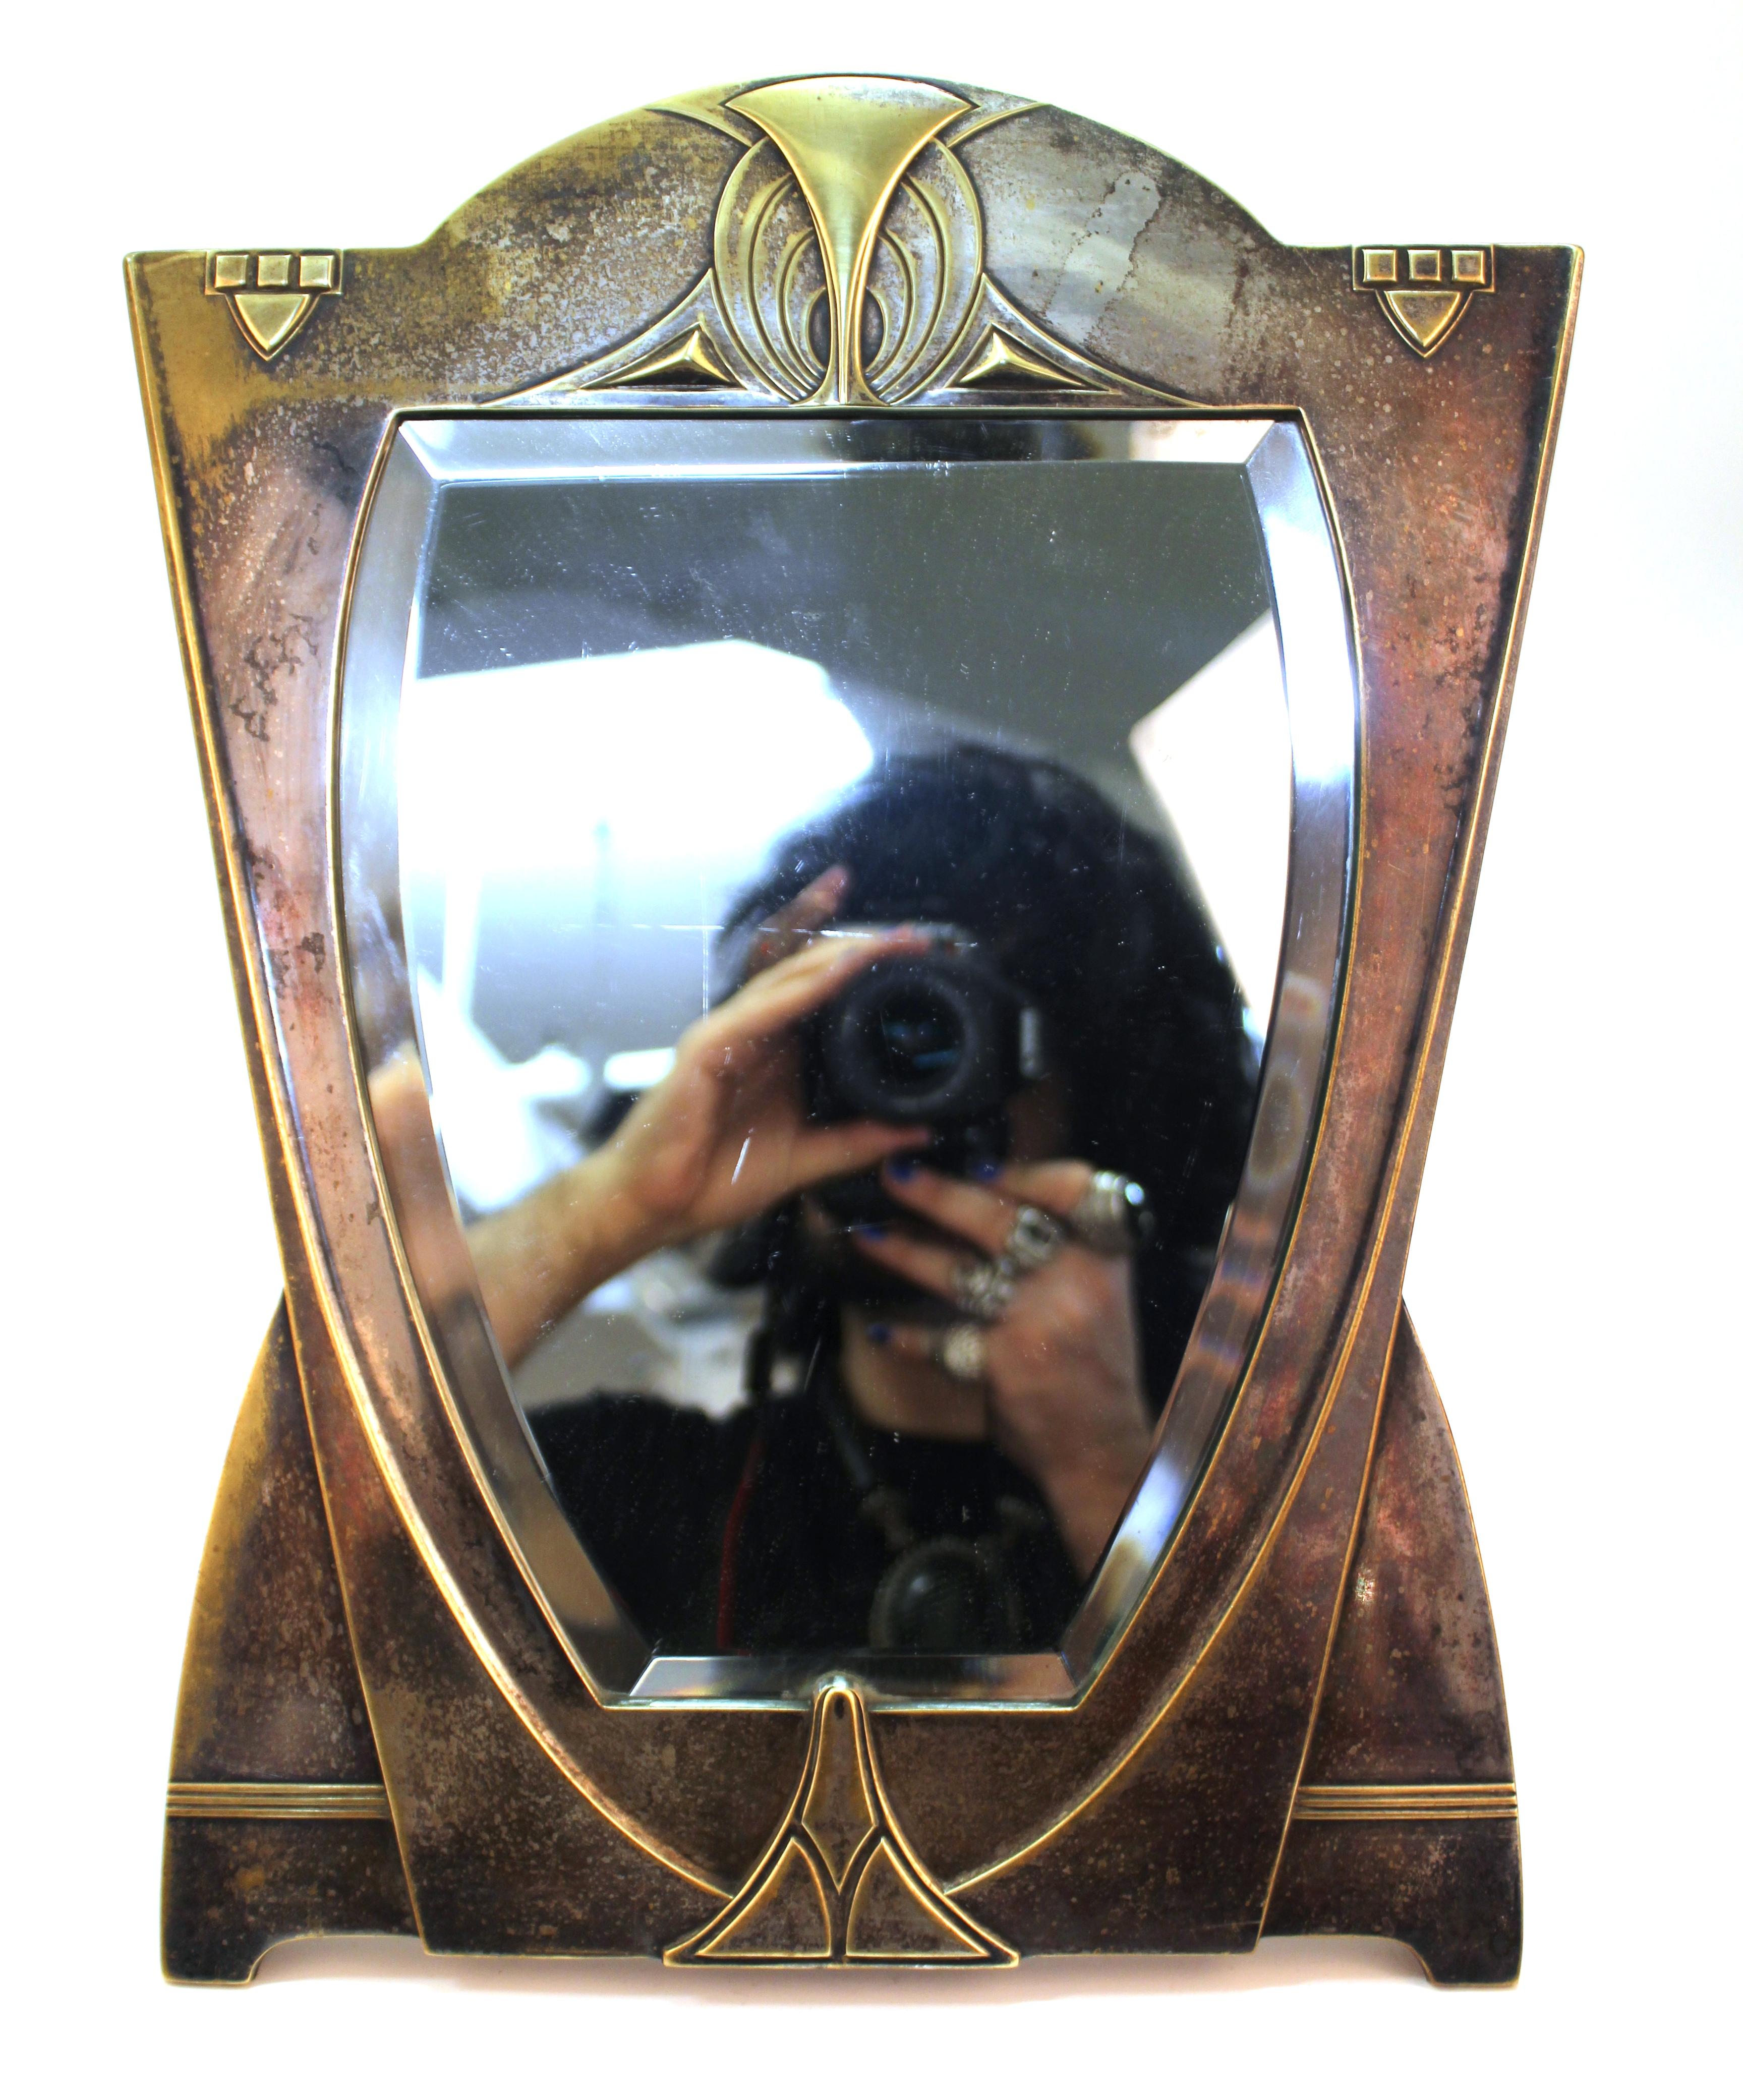 German Jugendstil mirror in silvered brass, attributed to German architect and designer Peter Behrens from the Darmstadt Artists' Colony. The piece was made in circa 1900 and is in great vintage condition, with age-appropriate patina to the metal